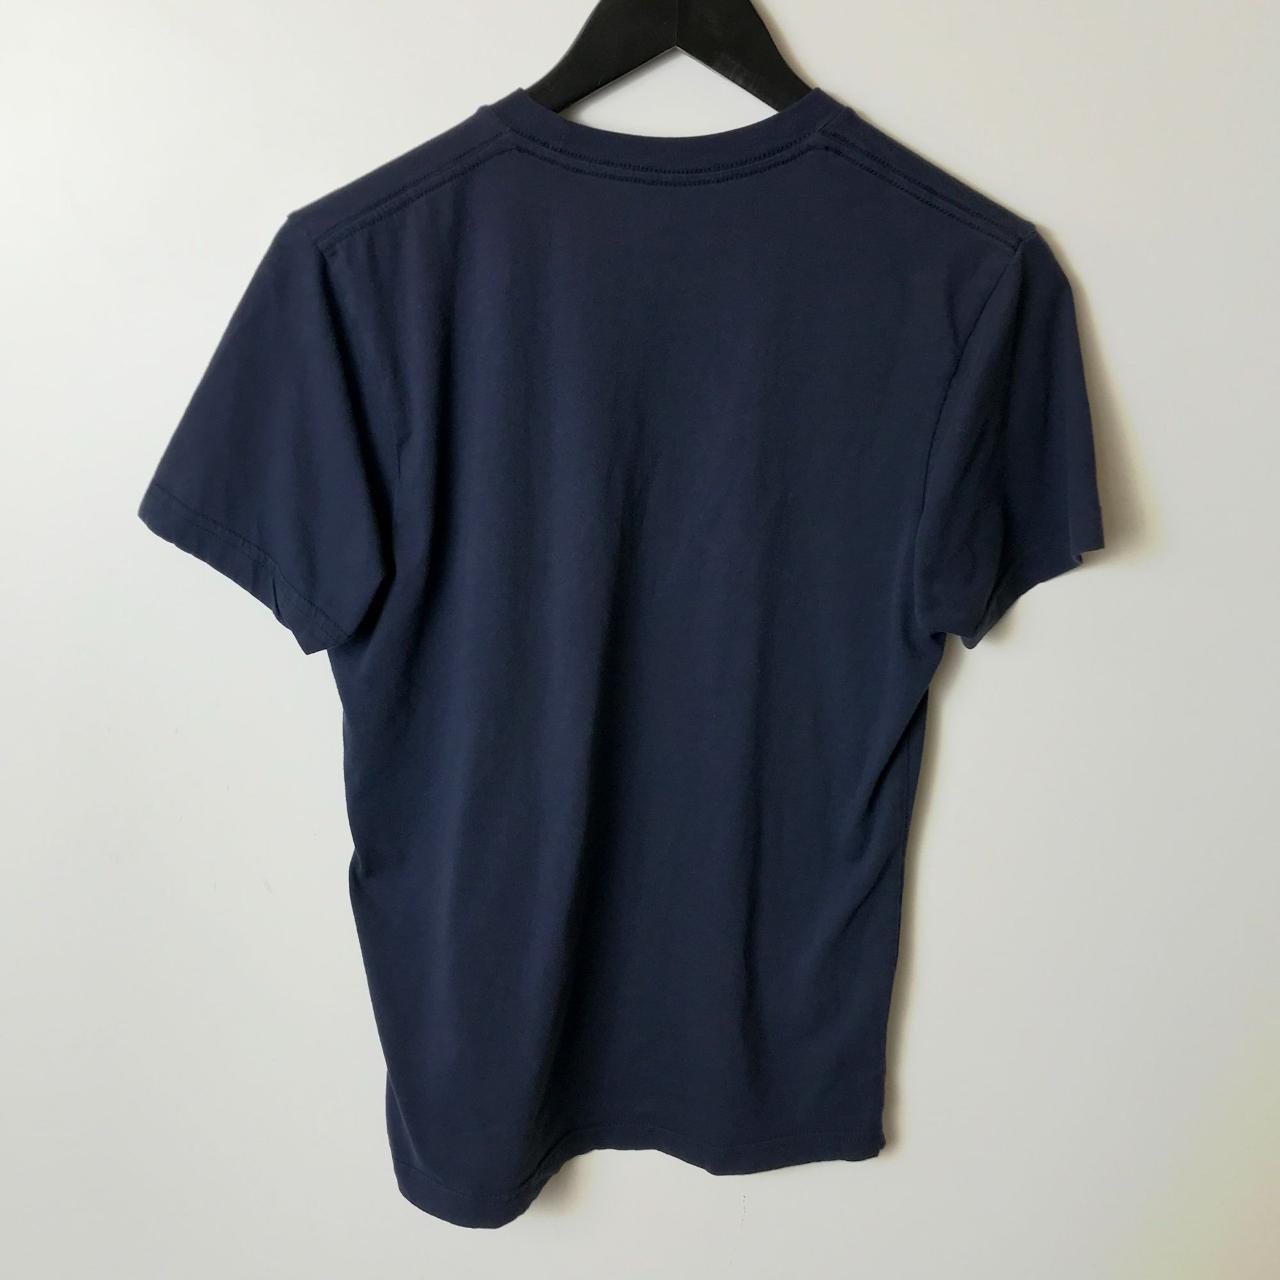 PowerChill yoga T-shirt, Old Navy Super soft and - Depop